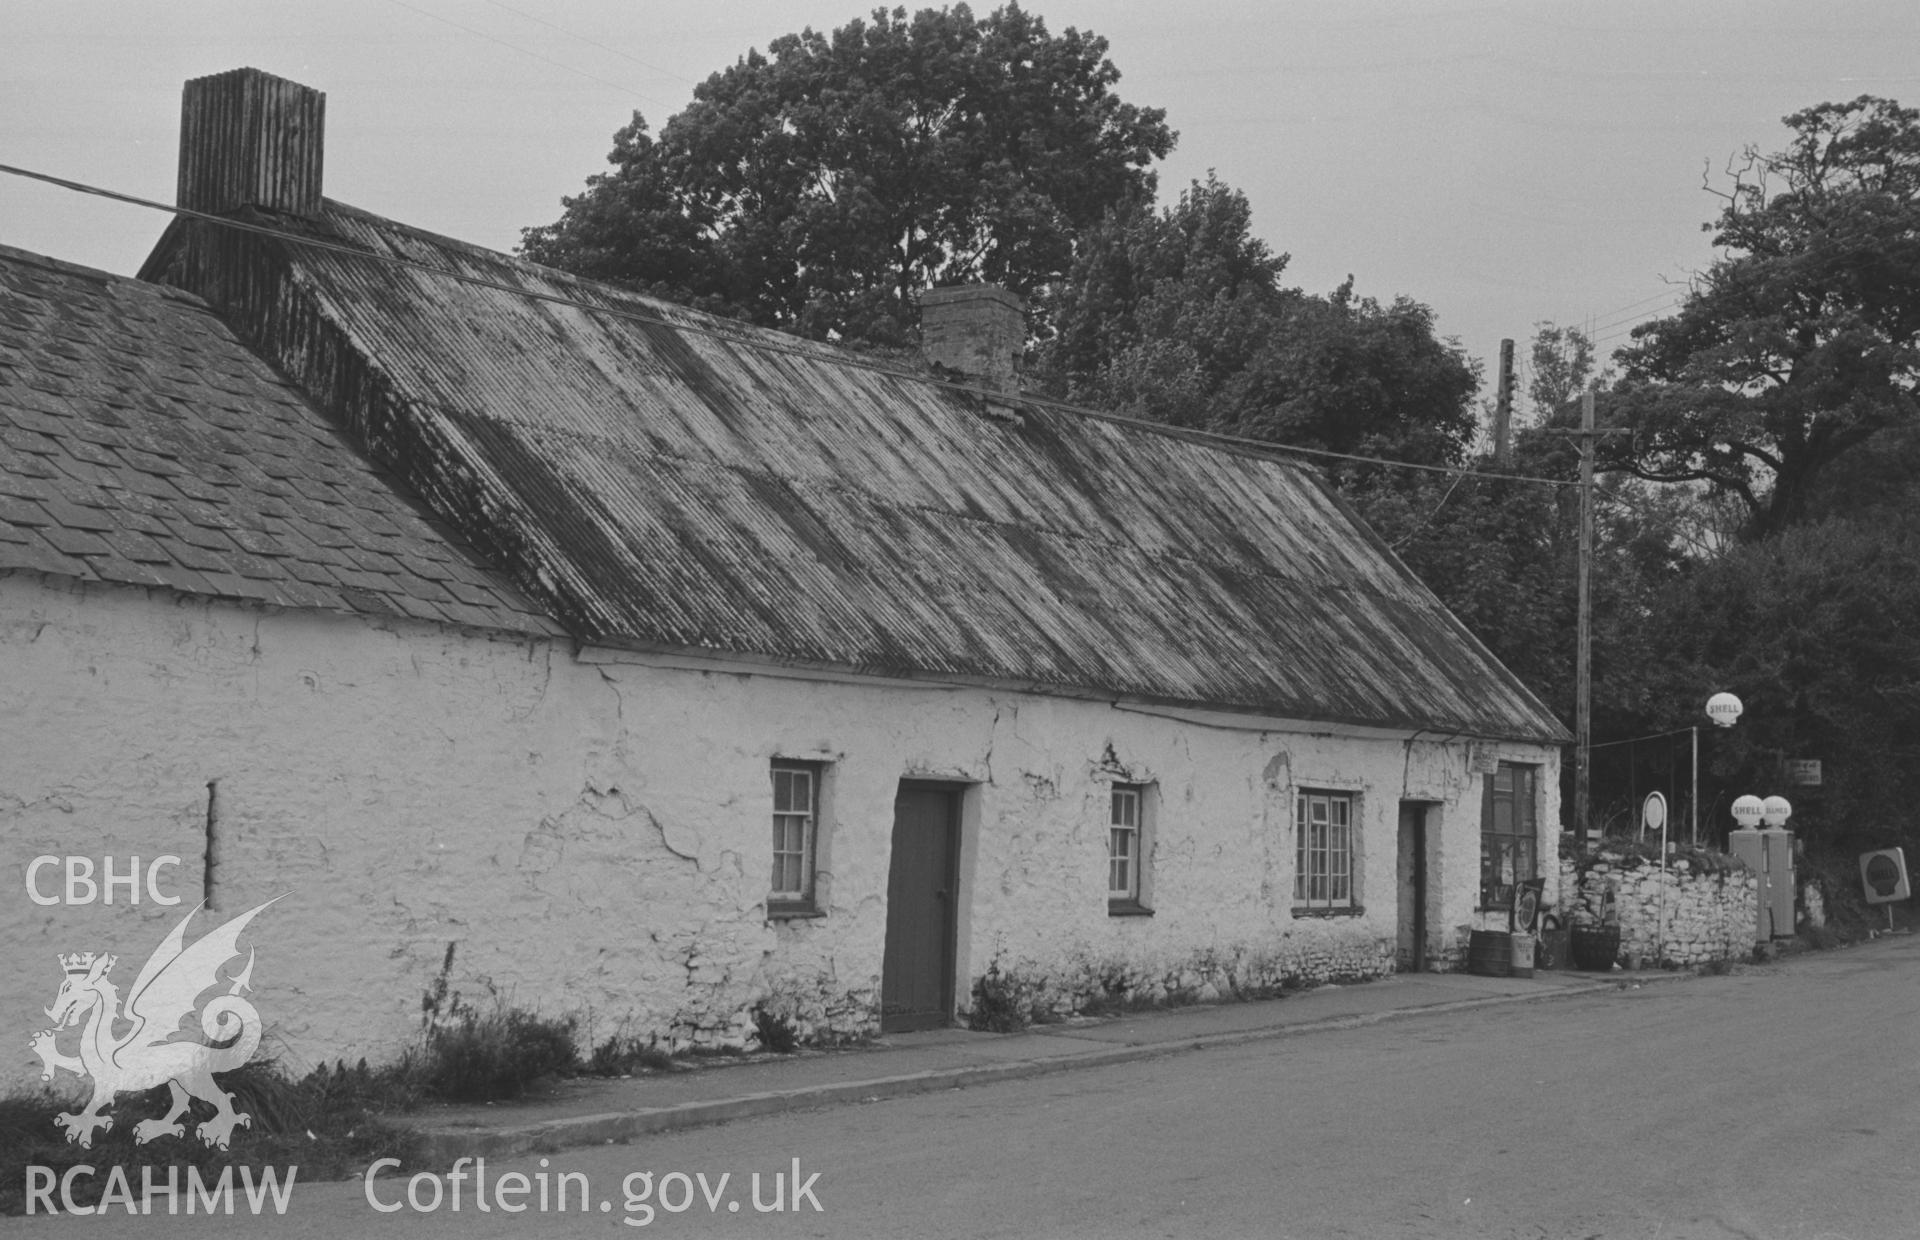 Digital copy of a black and white negative showing cottages and Shell petrol pumps on west side of the road at the north end of Talsarn. Photographed by Arthur O. Chater on 5th September 1966 looking north north west from Grid Ref SN 545 563.